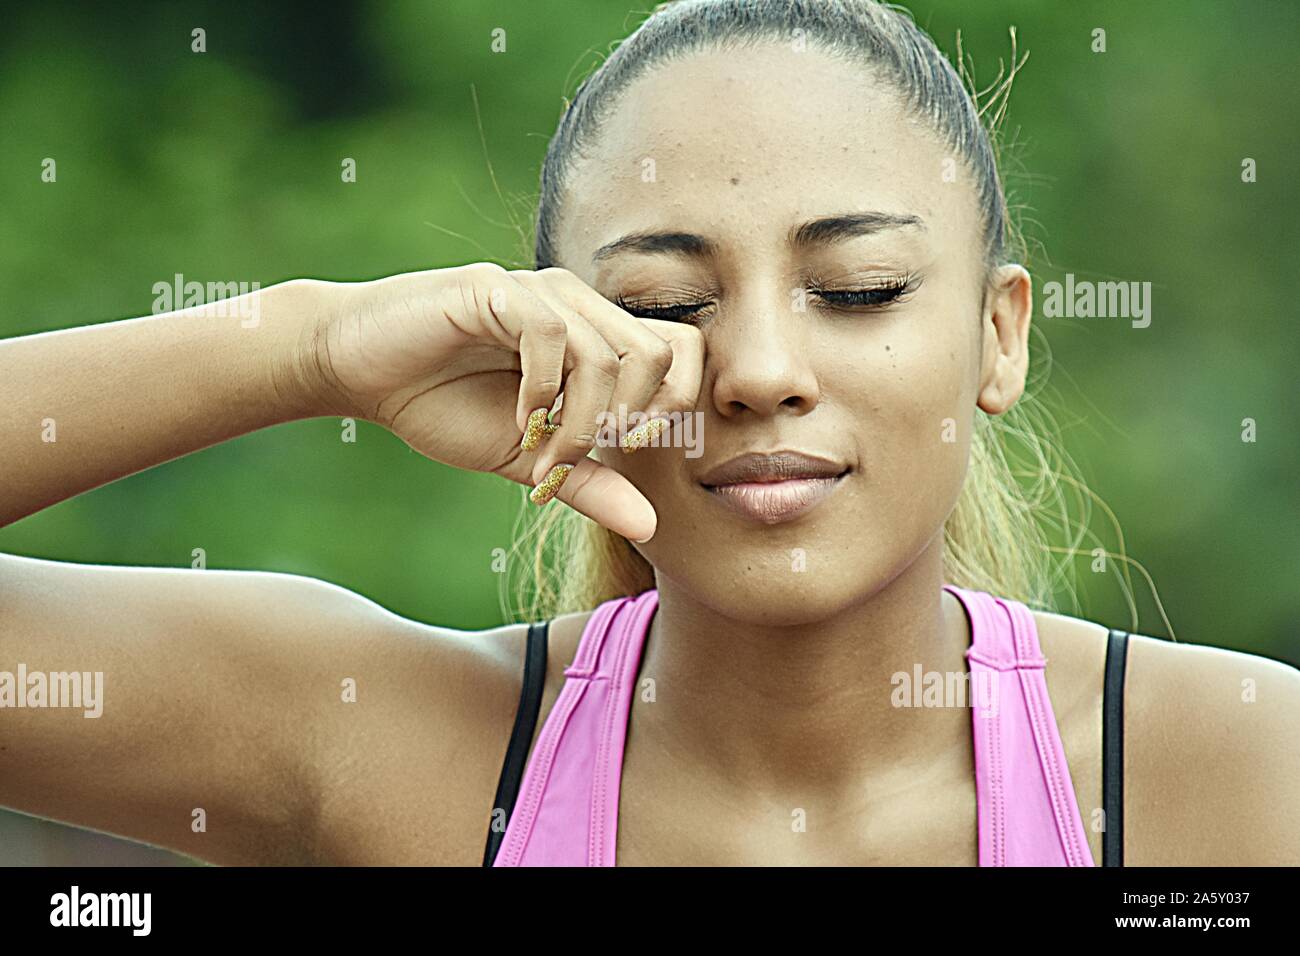 Tearful Diverse Person Stock Photo